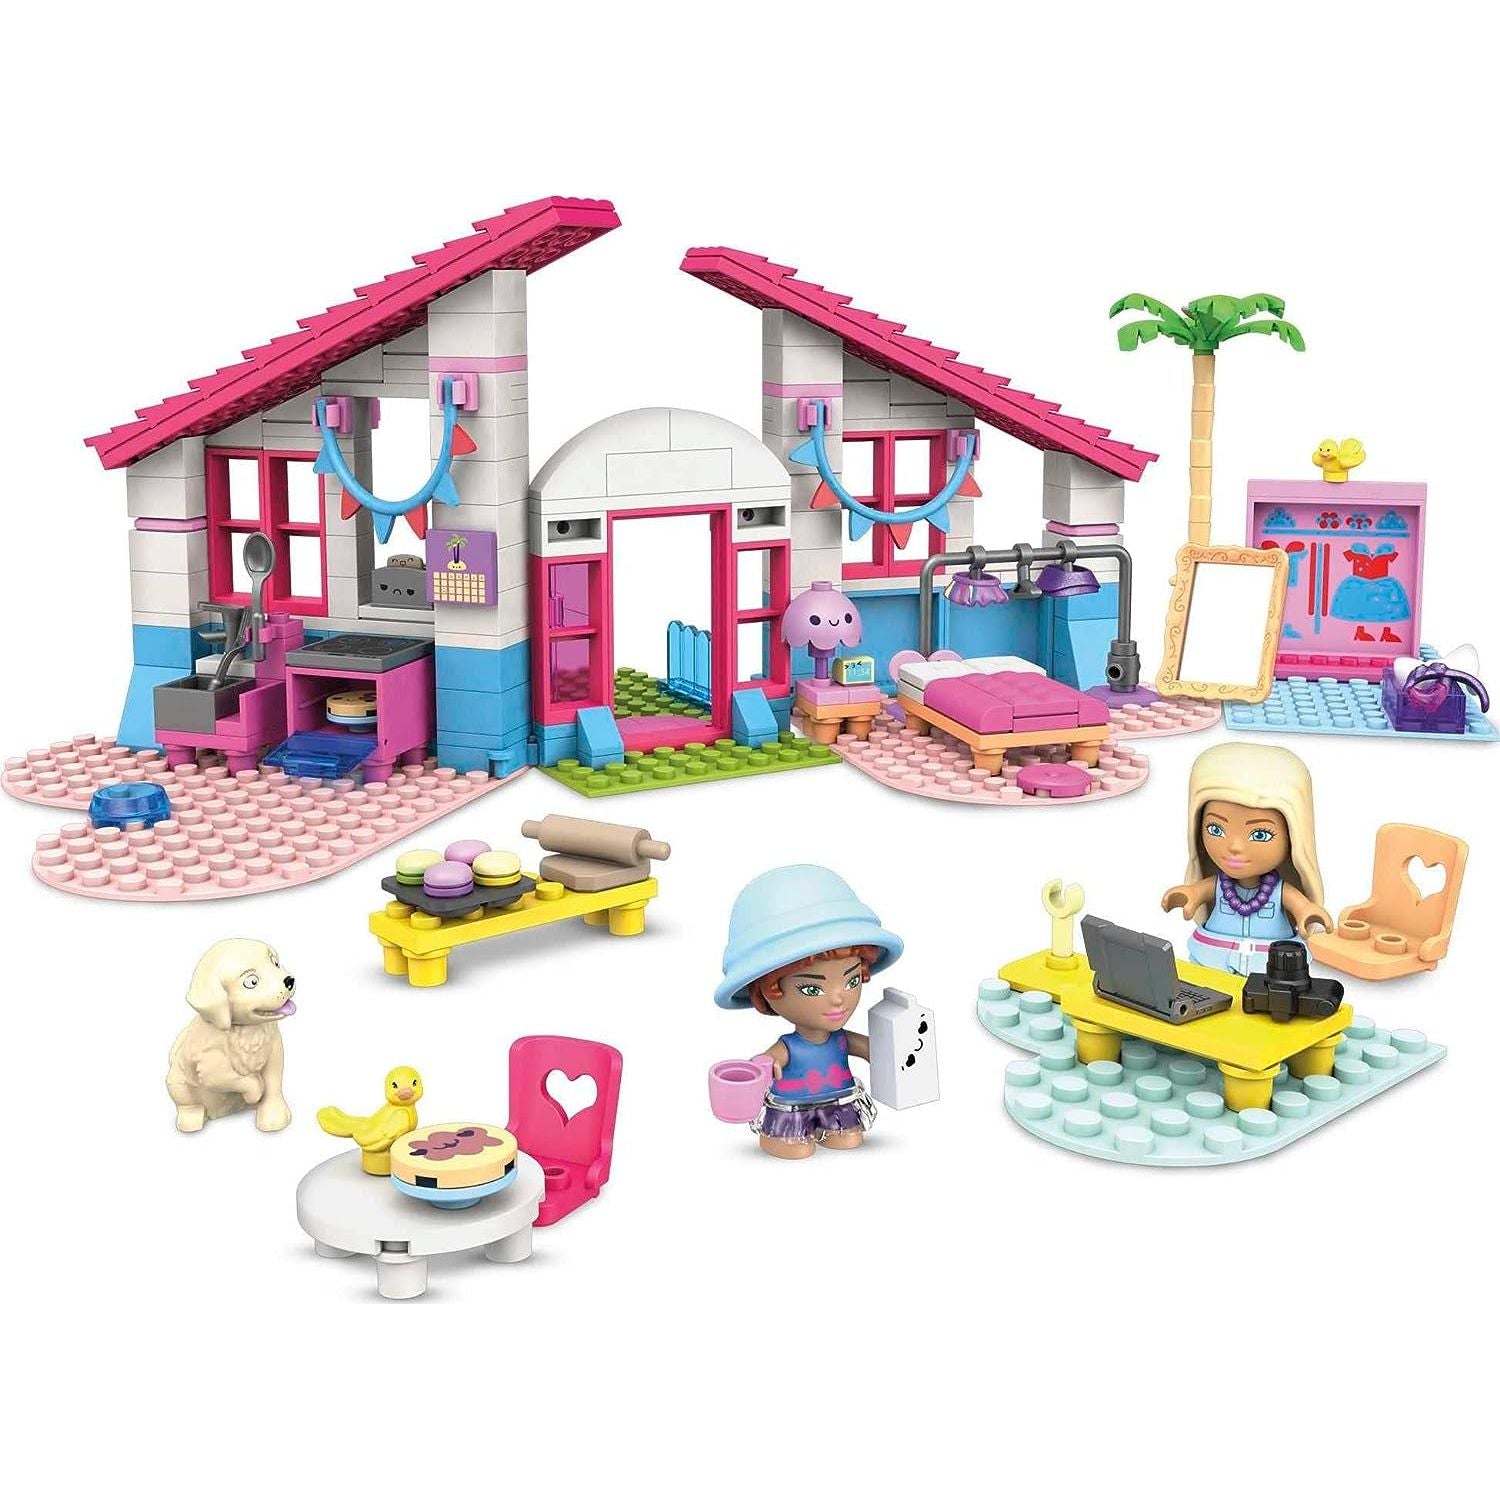 MEGA Barbie Building Toys Playset, Malibu Dream House with 303 Pieces, 2 Micro-Dolls, Accessories and Furniture, 3 Pets